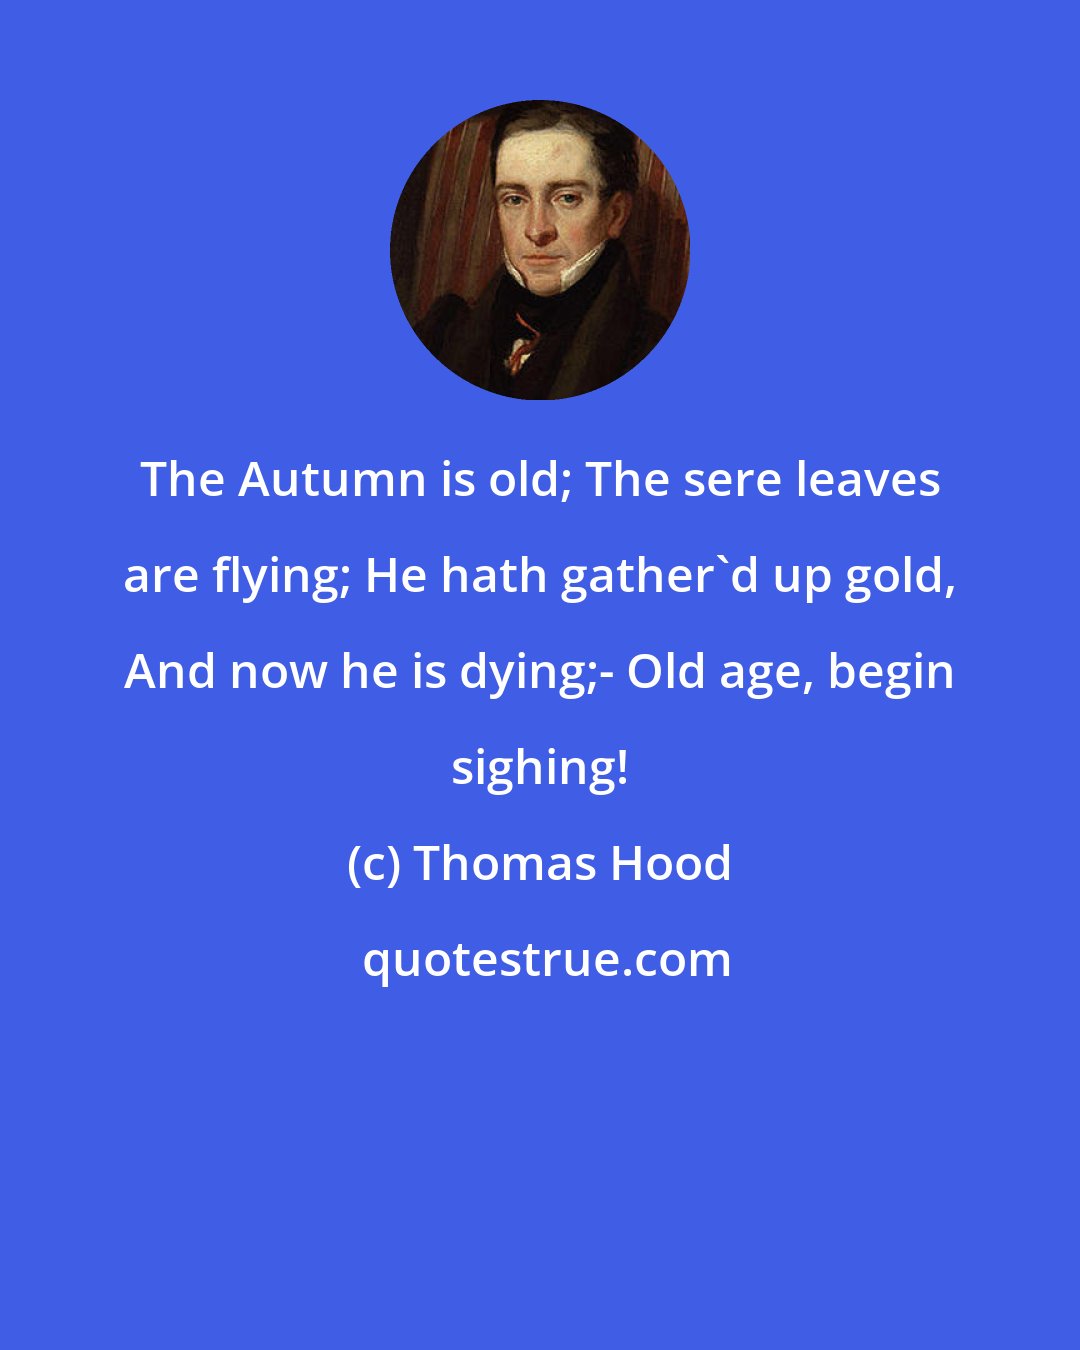 Thomas Hood: The Autumn is old; The sere leaves are flying; He hath gather'd up gold, And now he is dying;- Old age, begin sighing!